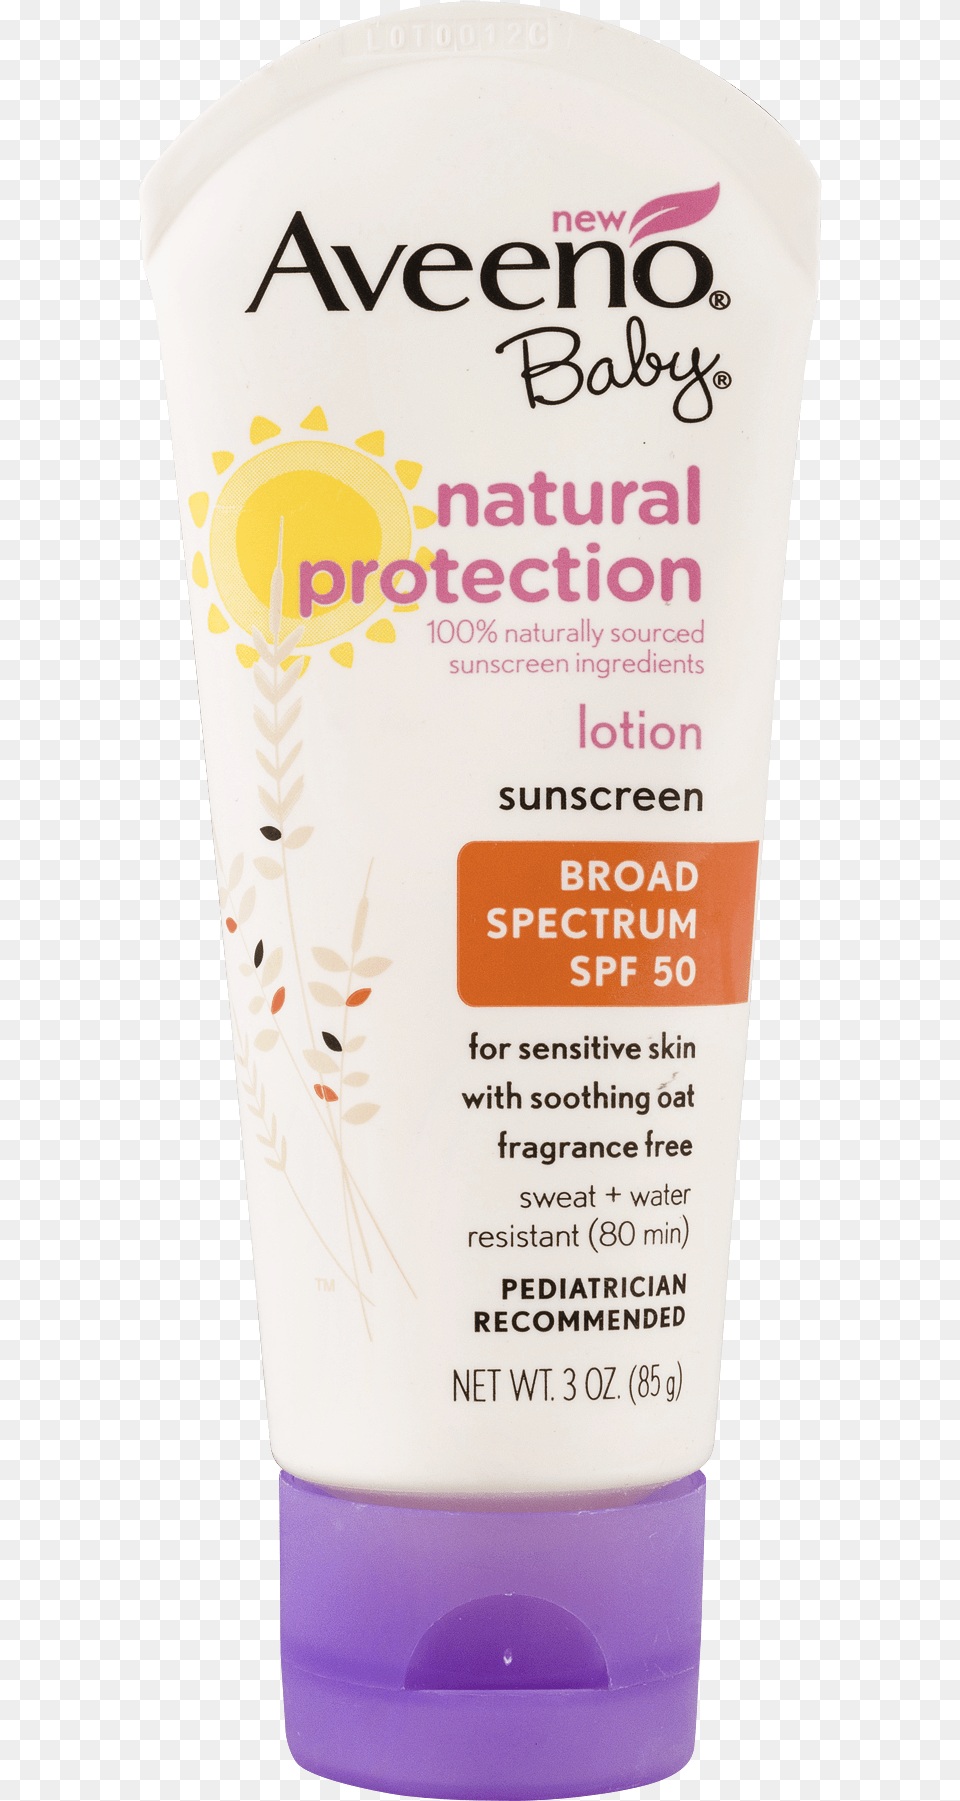 Aveeno Baby Natural Protection Lotion Sunscreen, Bottle, Cosmetics, Can, Tin Free Png